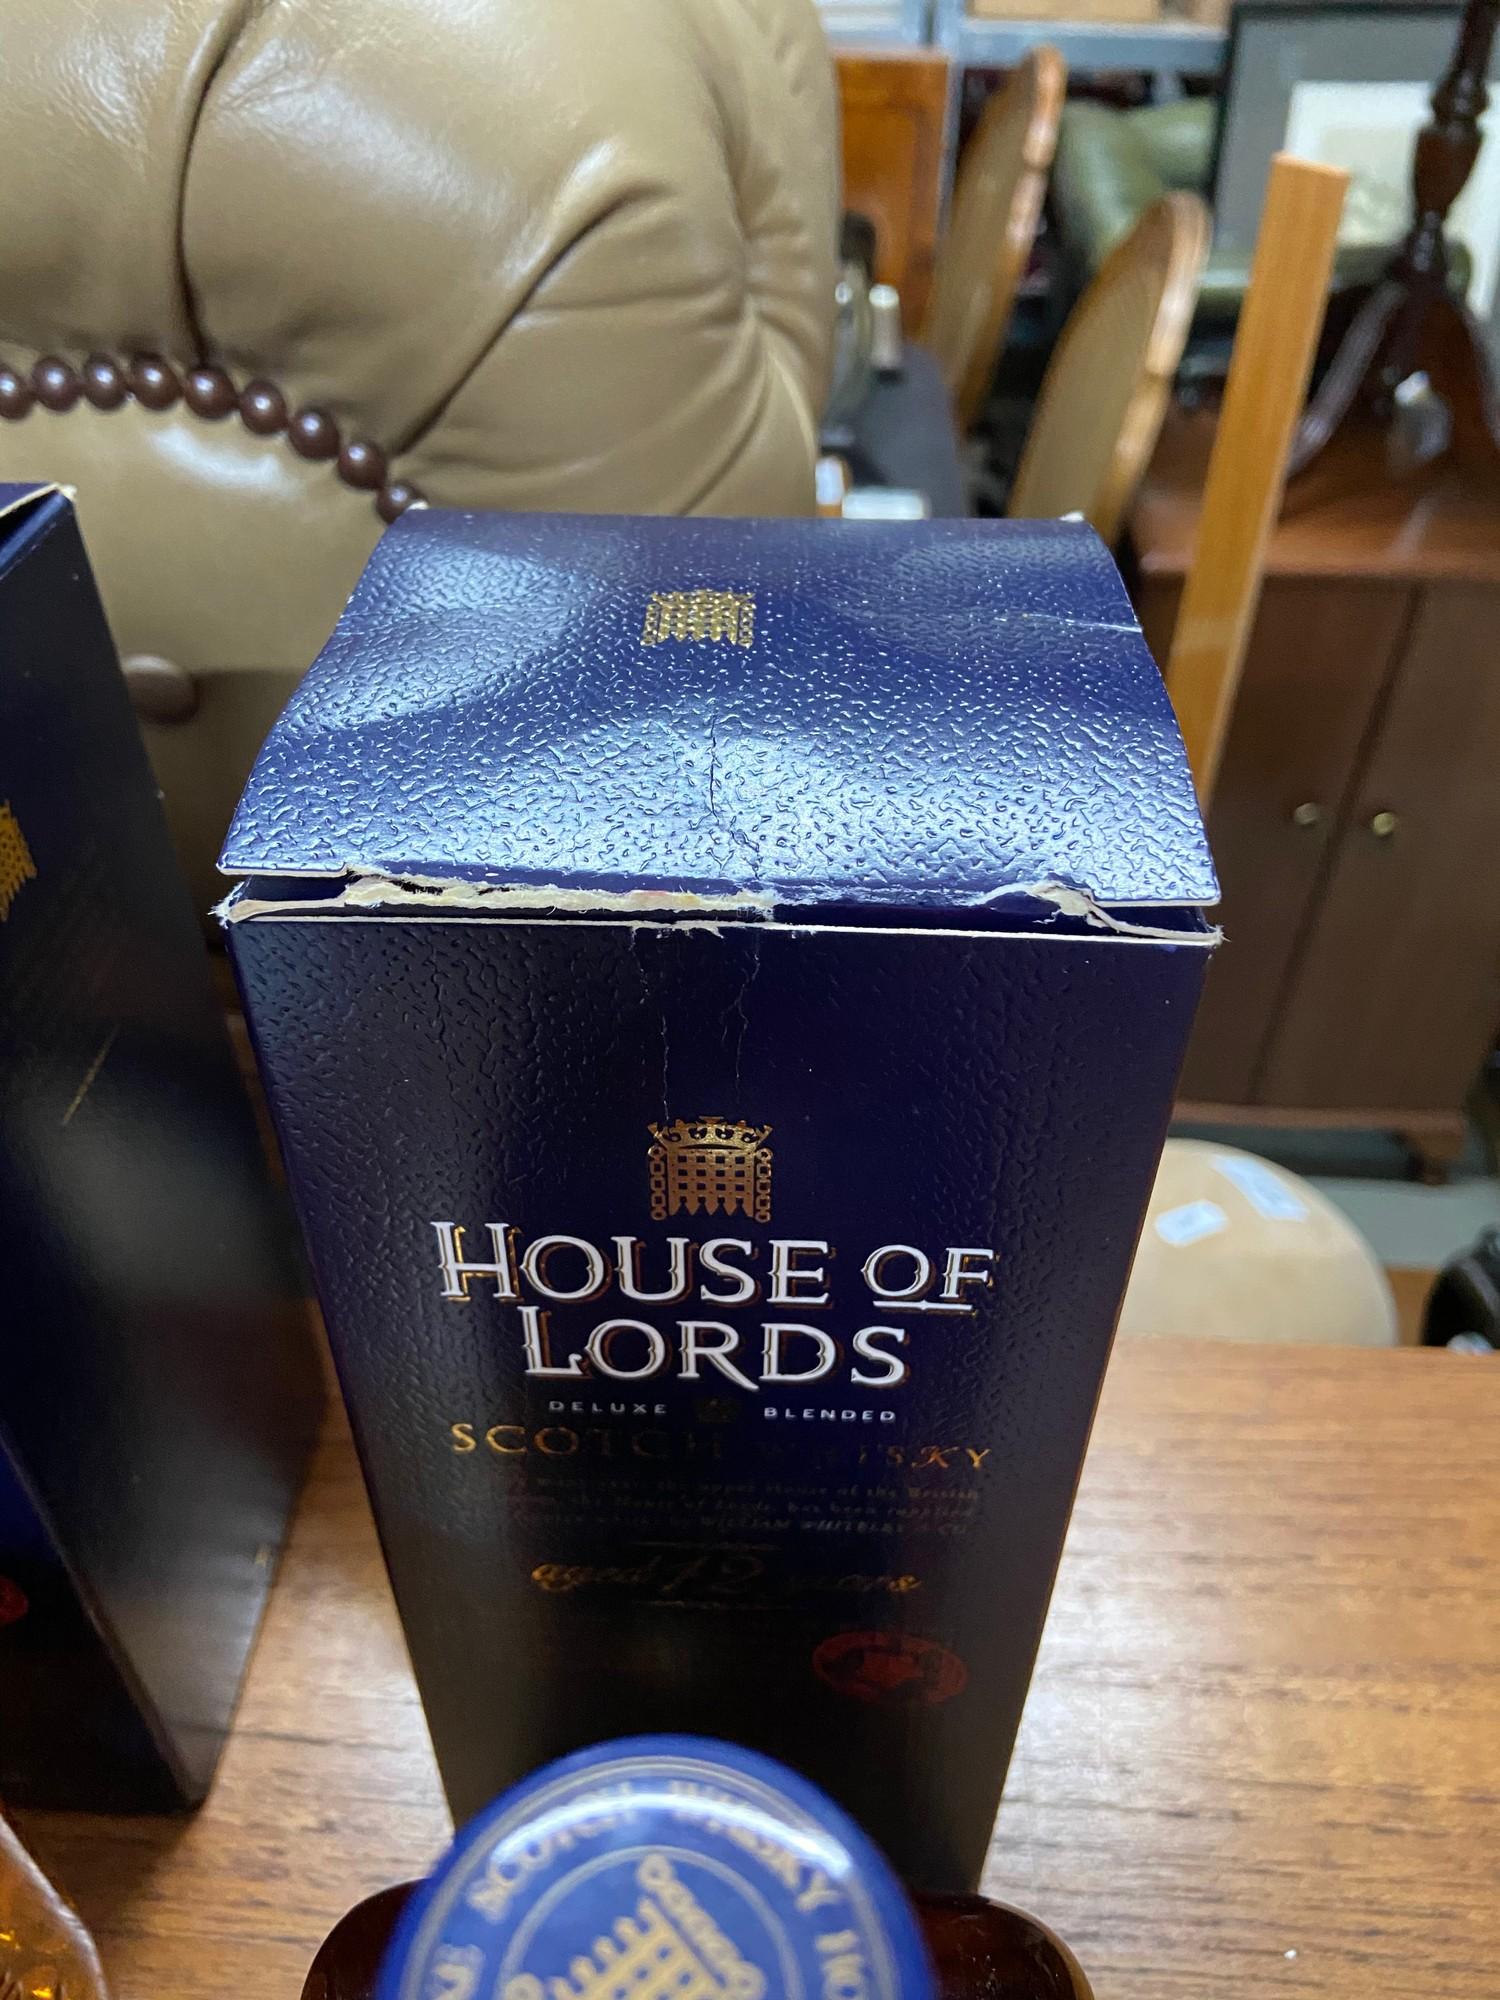 House of Lords Deluxe Blended Scotch Whisky aged 12 years, Full, sealed & Boxed - Image 2 of 2